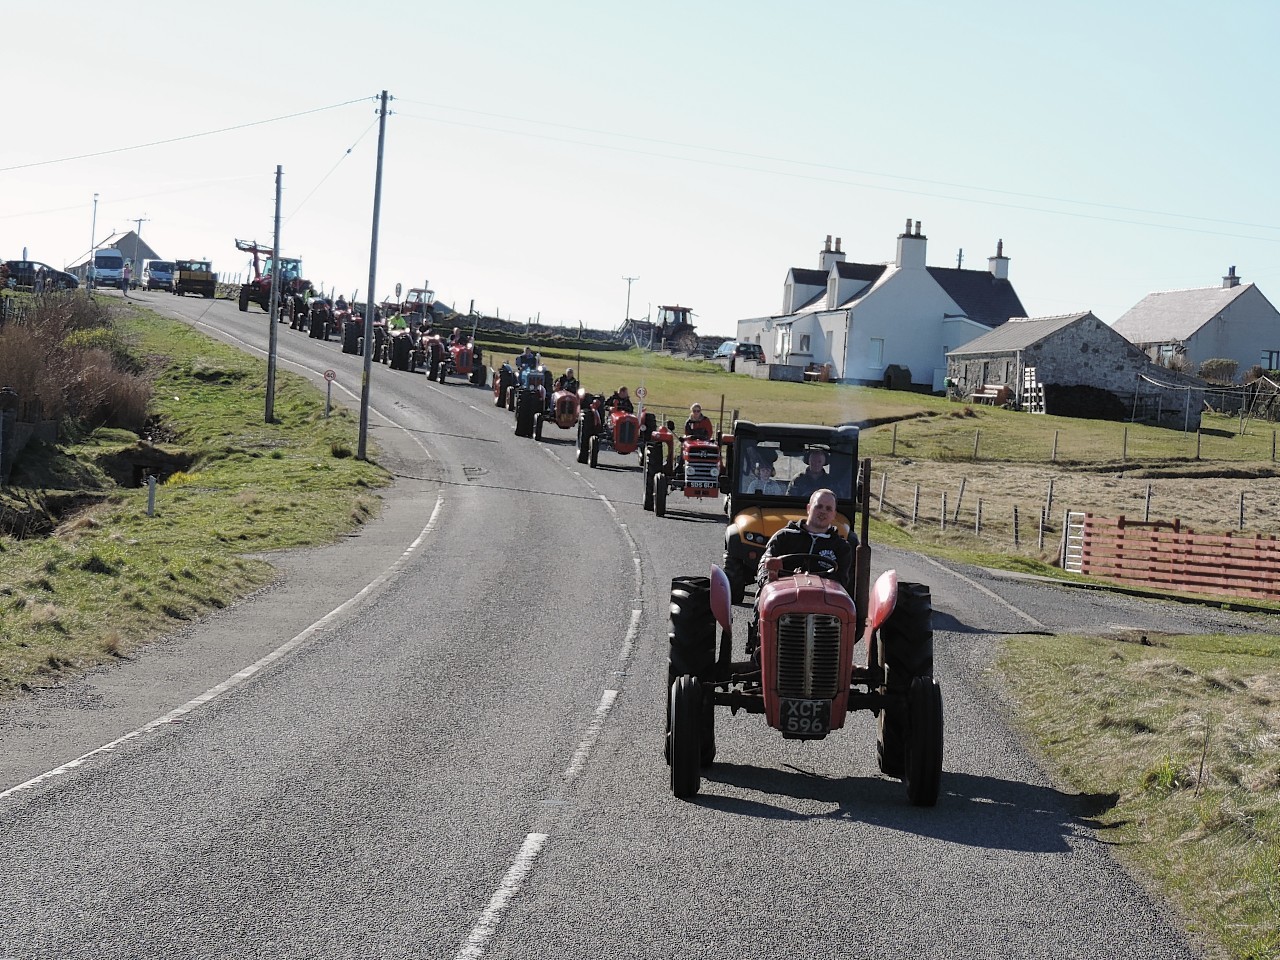 The tractor run raised more than £7,500